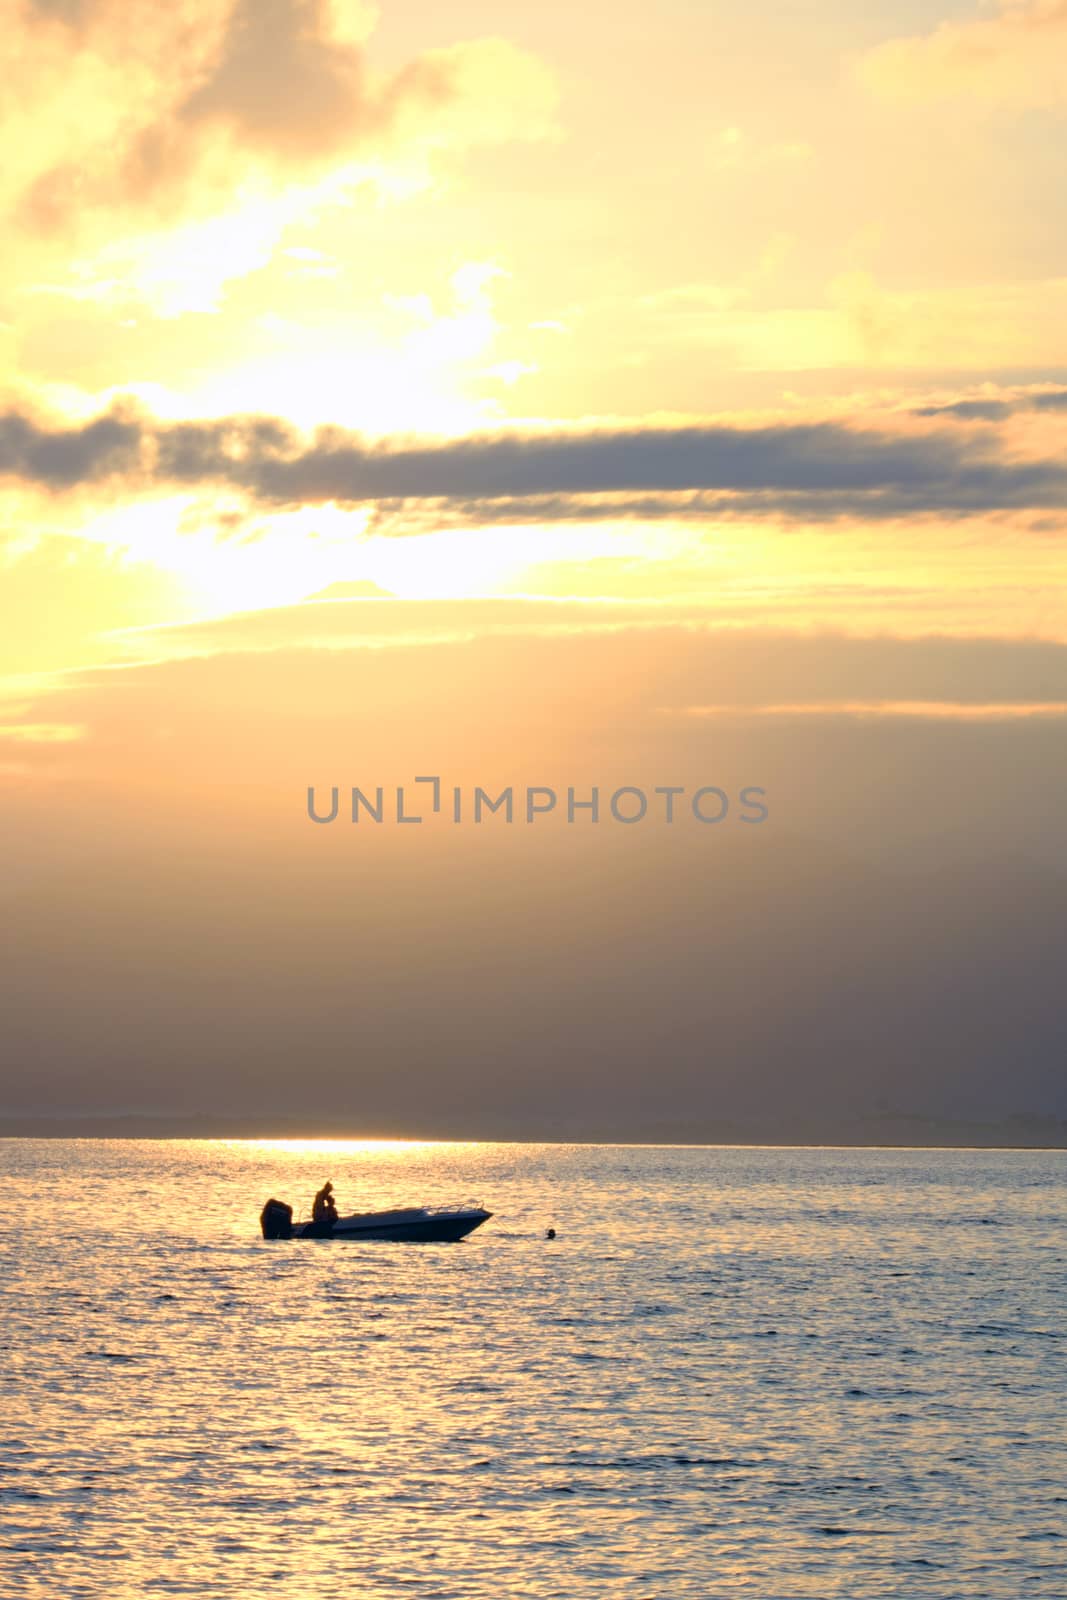 Boat with snorkelers at the sunrise at the sea